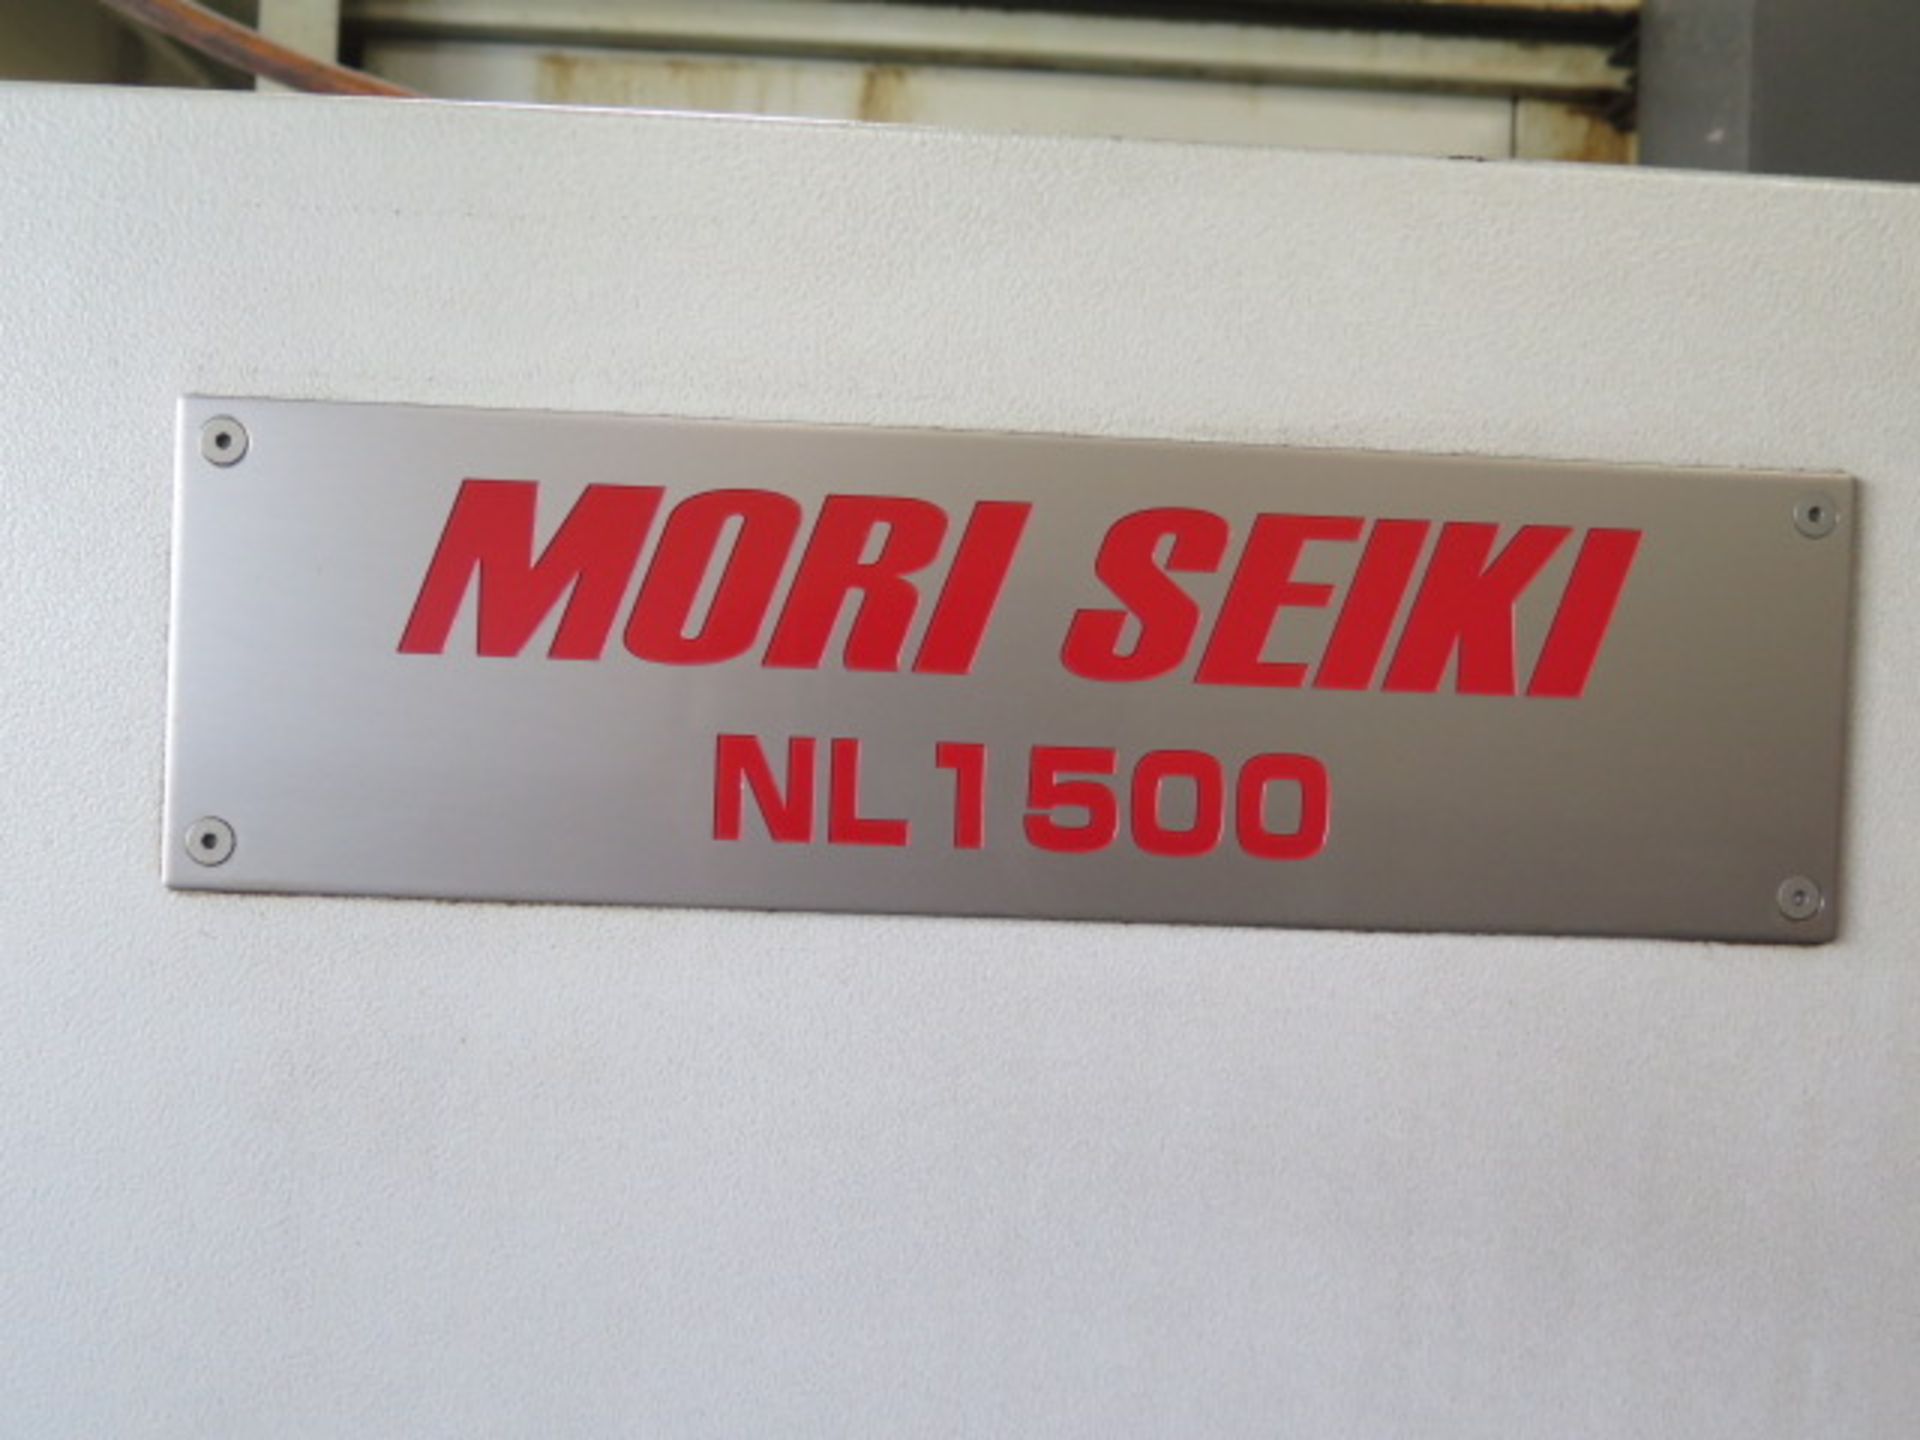 2005 Mori Seiki NL1500 S/500 Twin Spindle CNC Turning Center s/n NL151E01356, SOLD AS IS - Image 15 of 17